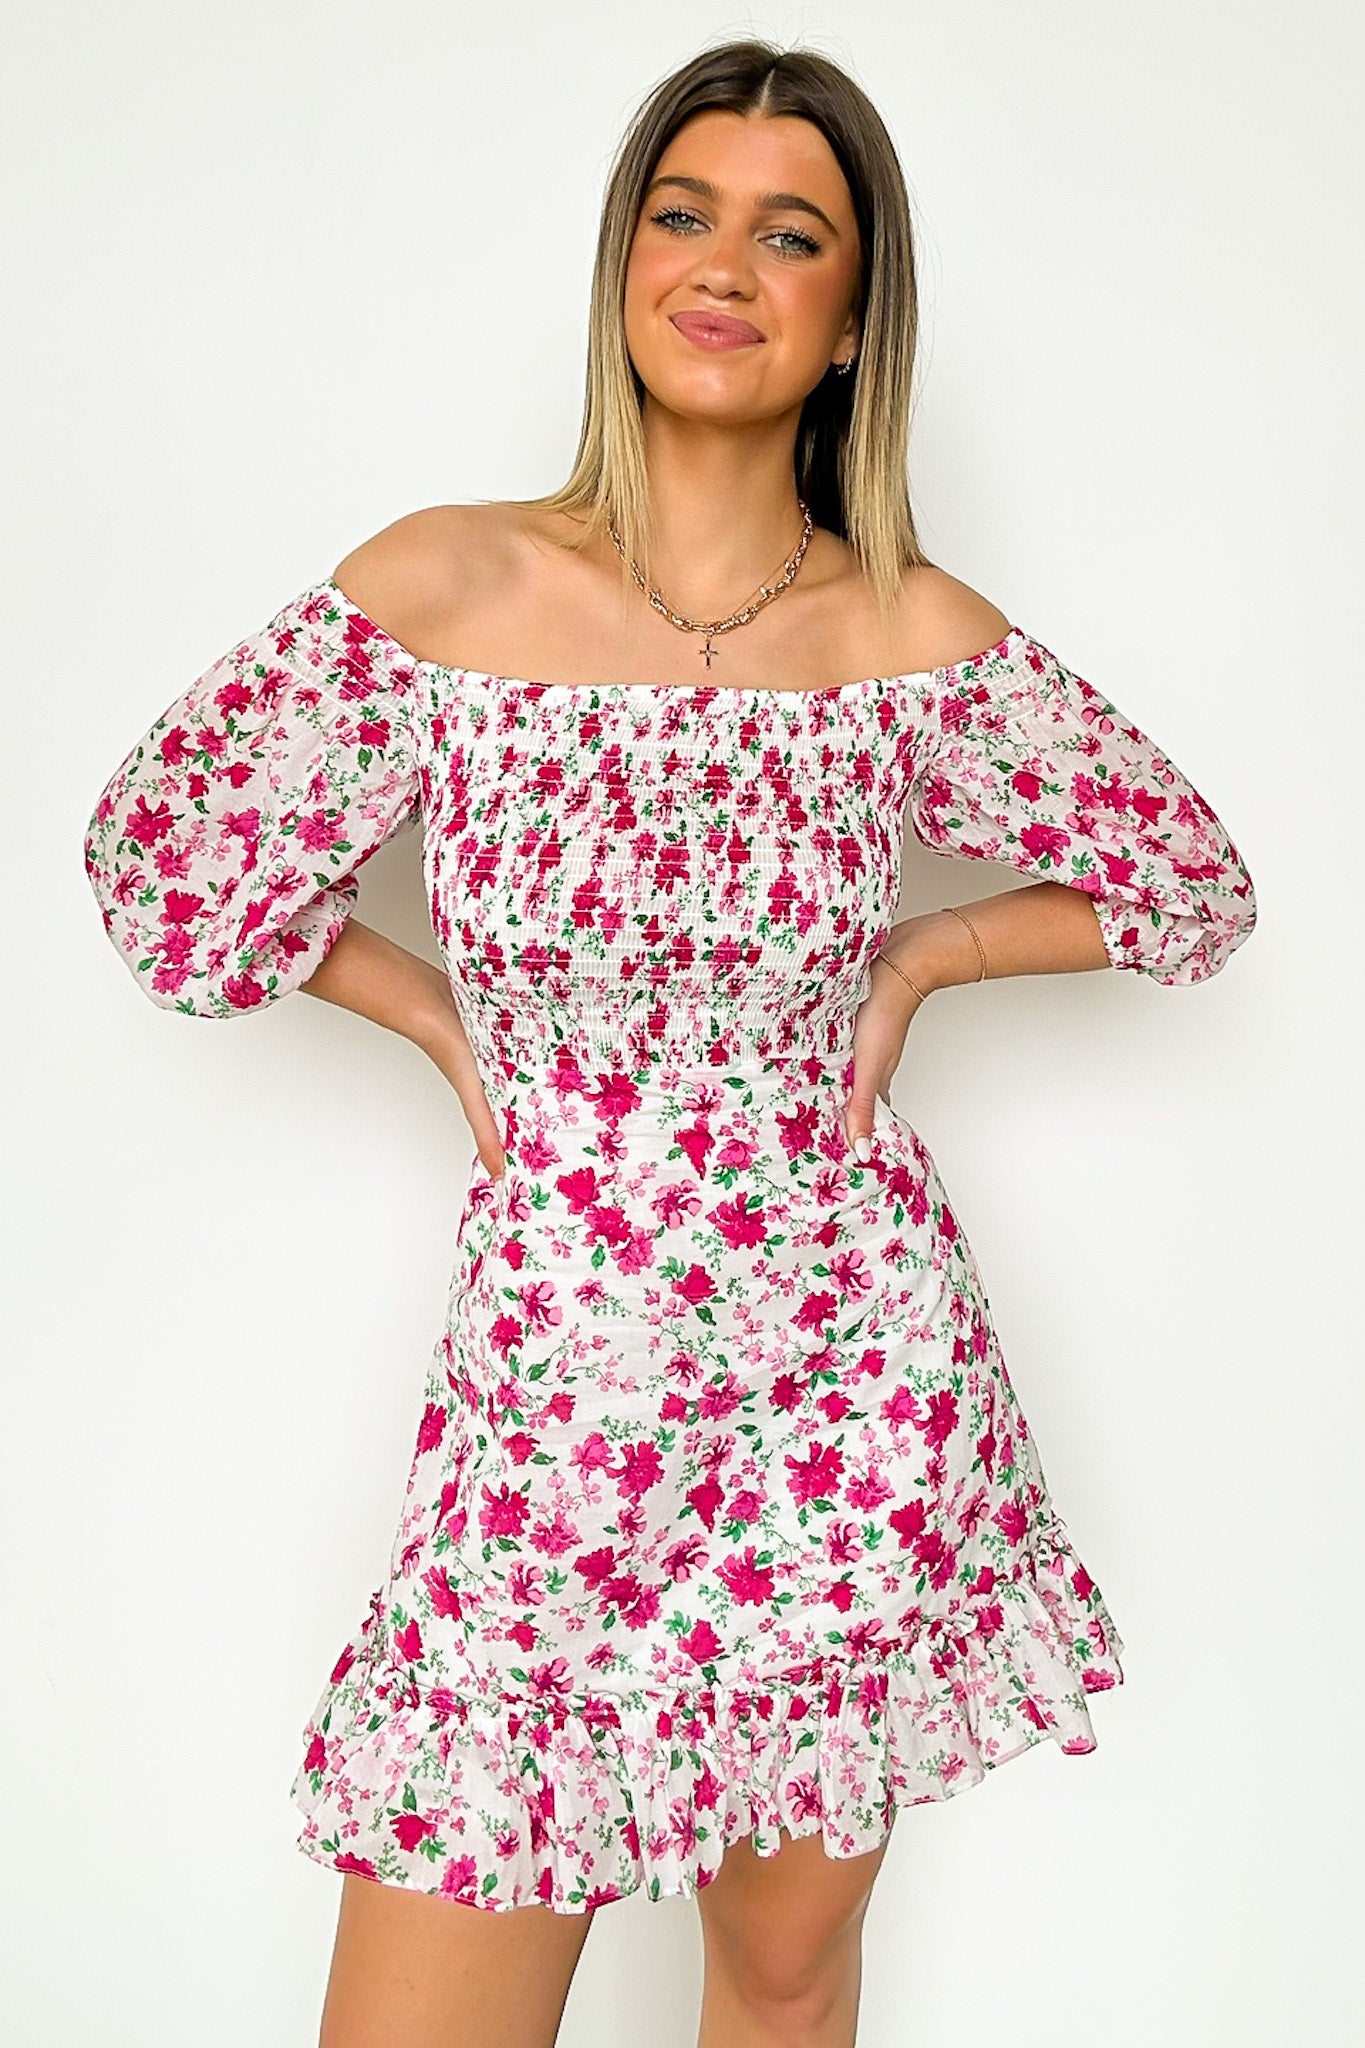  Darling Icon Off Shoulder Smocked Floral Dress - Madison and Mallory